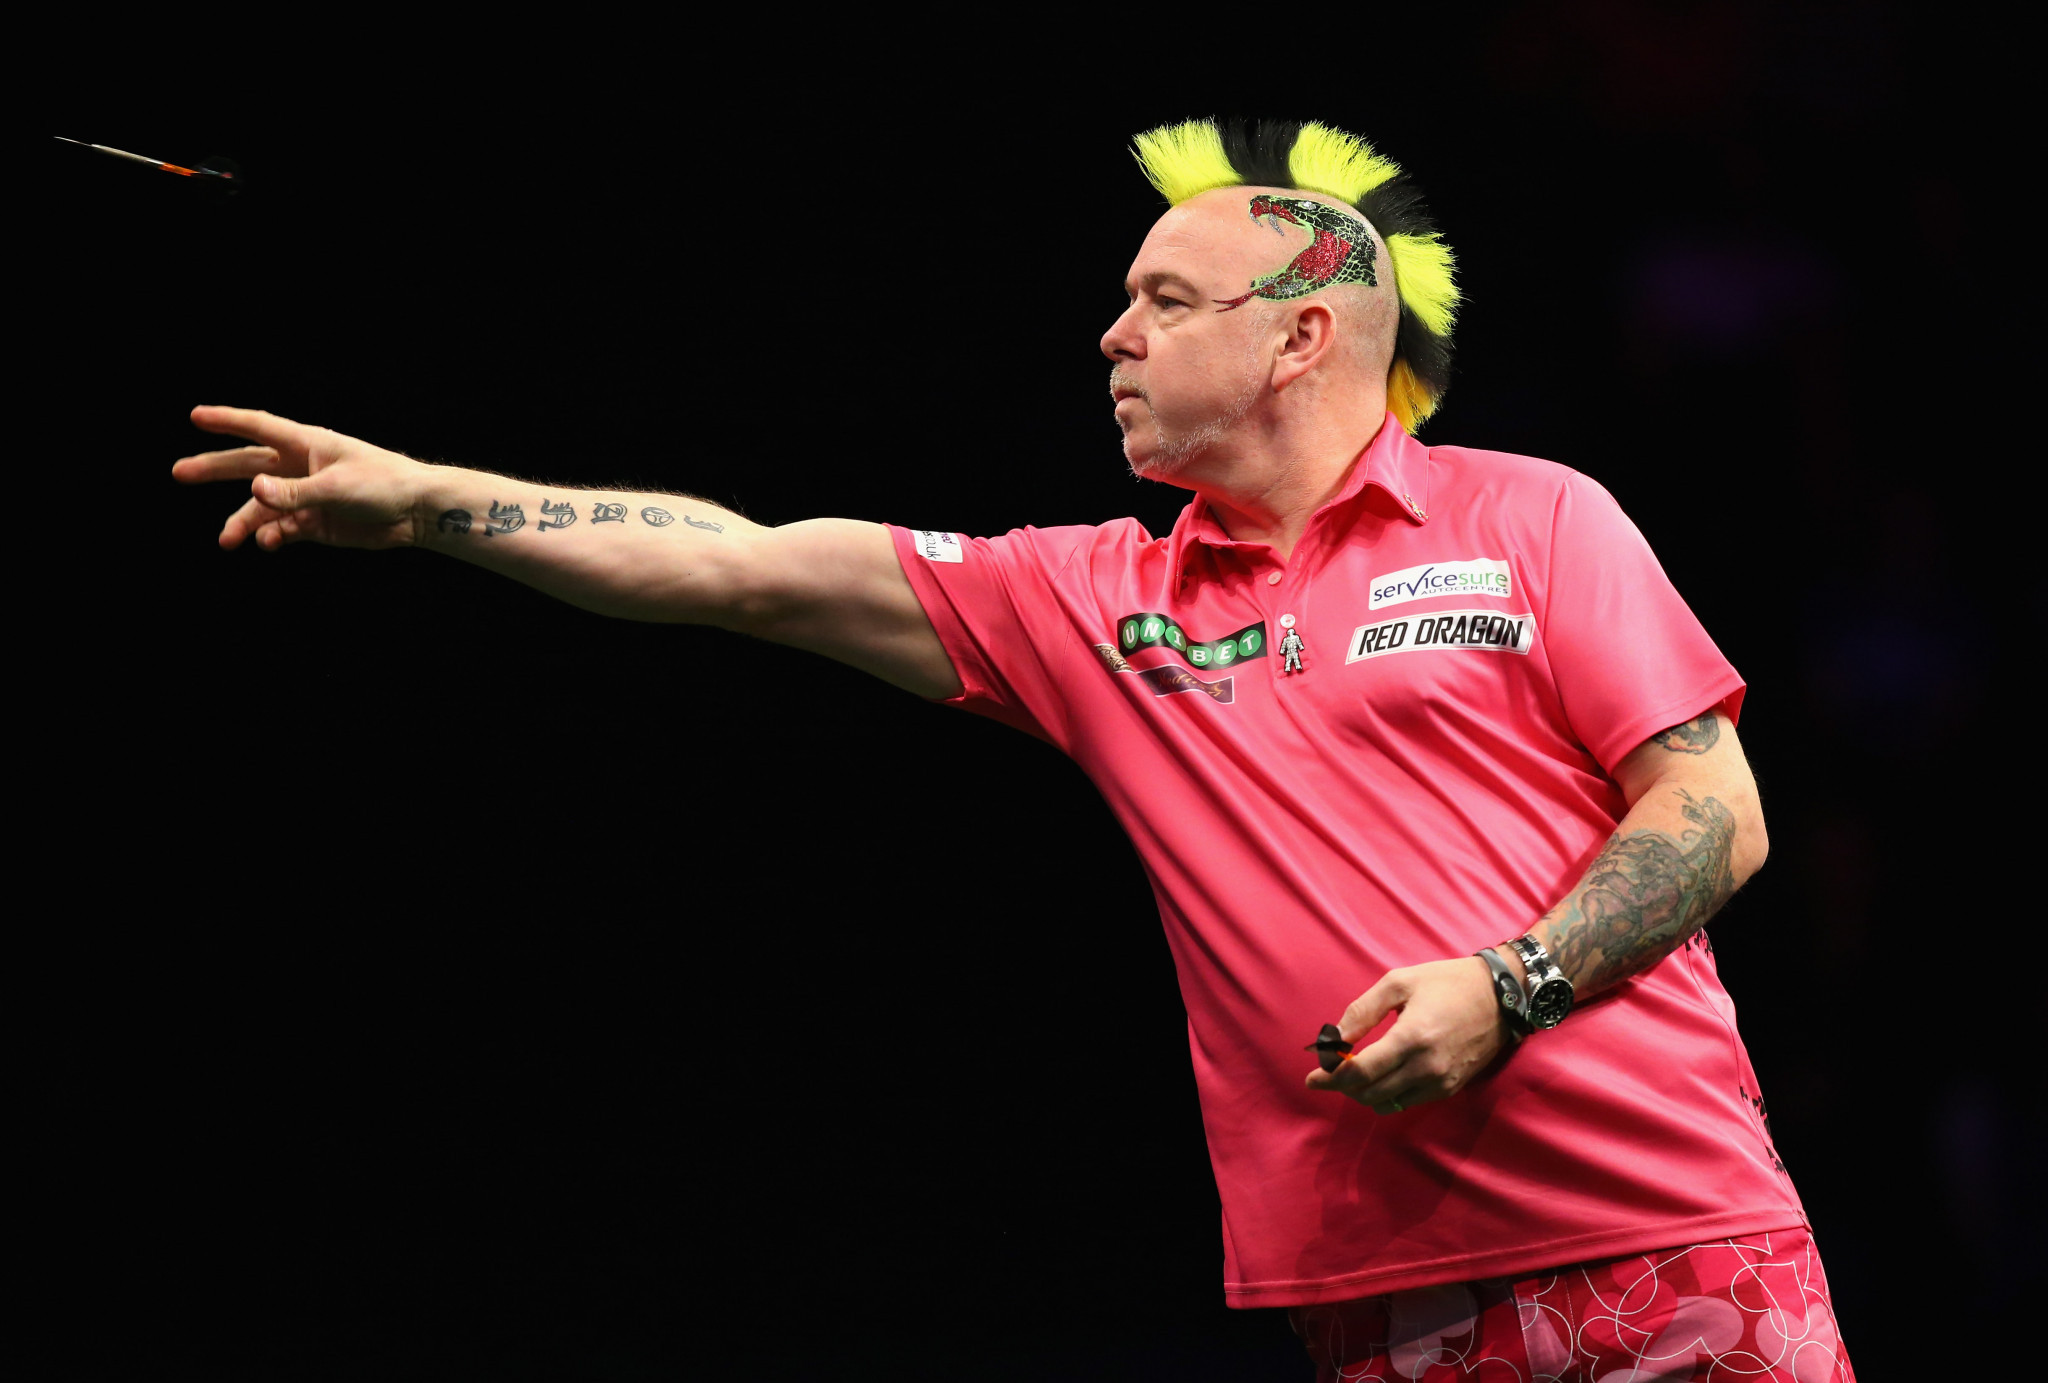 Top seeds Scotland ease through at World Cup of Darts